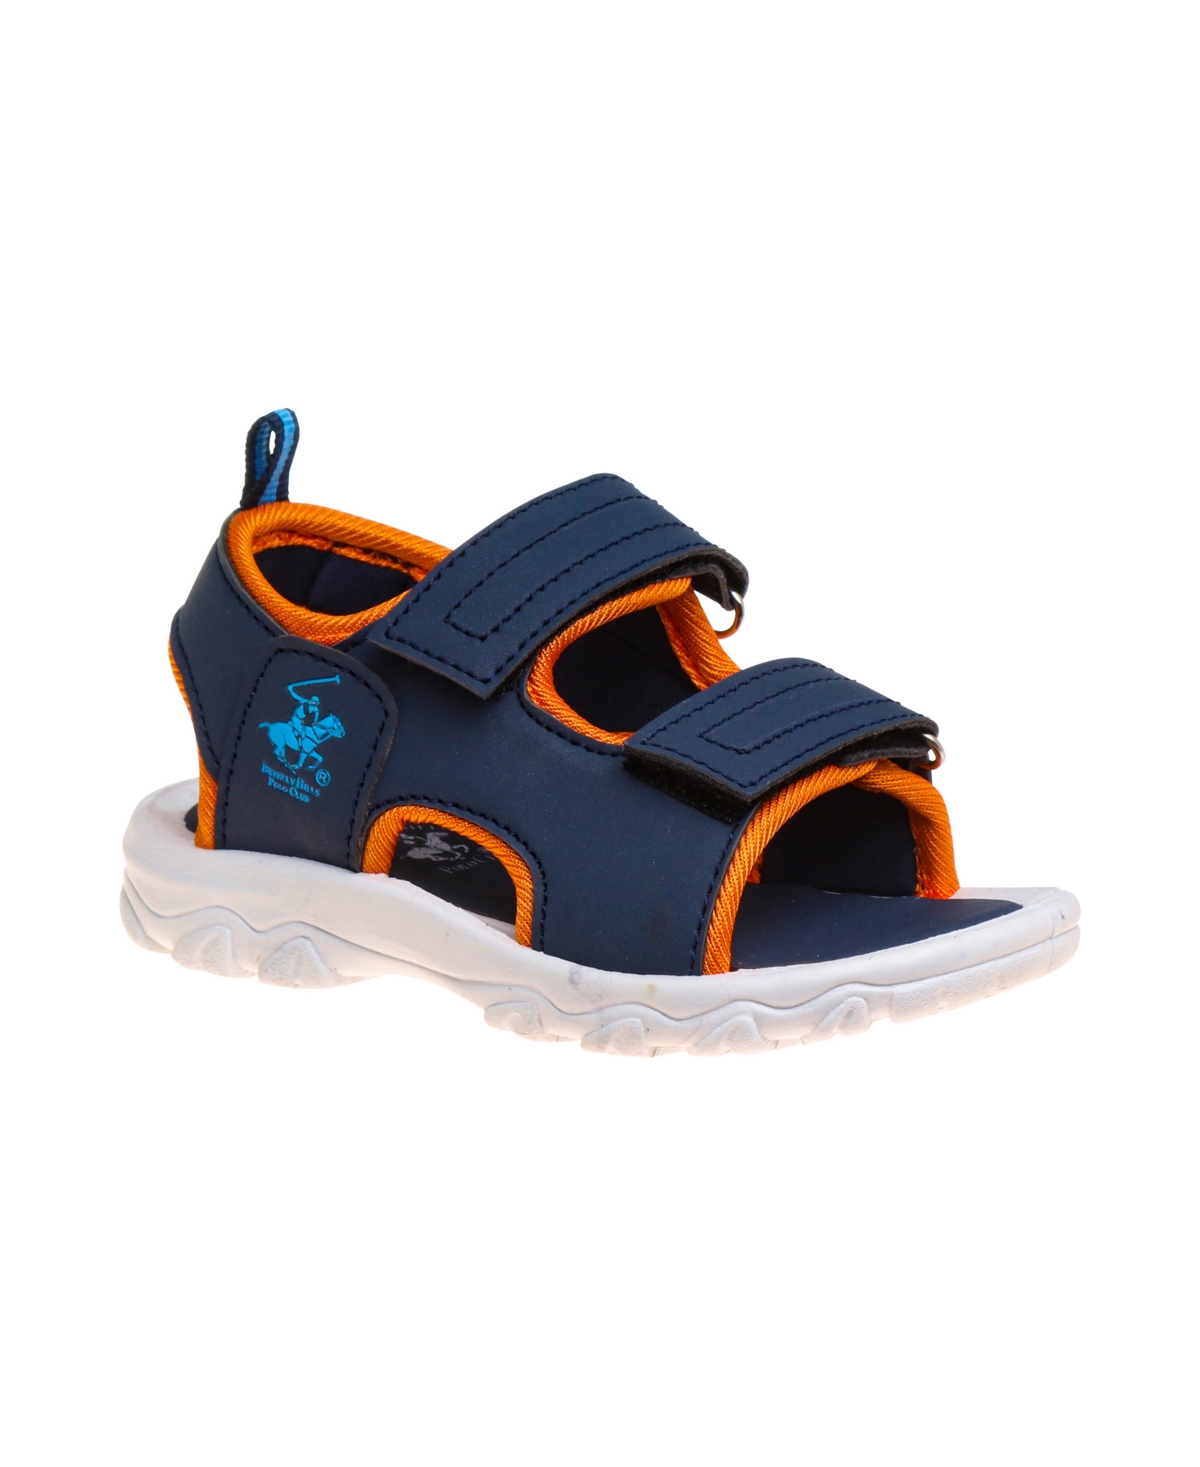 Beverly Hills Polo Club Little Boys Double Strap Sports Sandals In Navy,orange